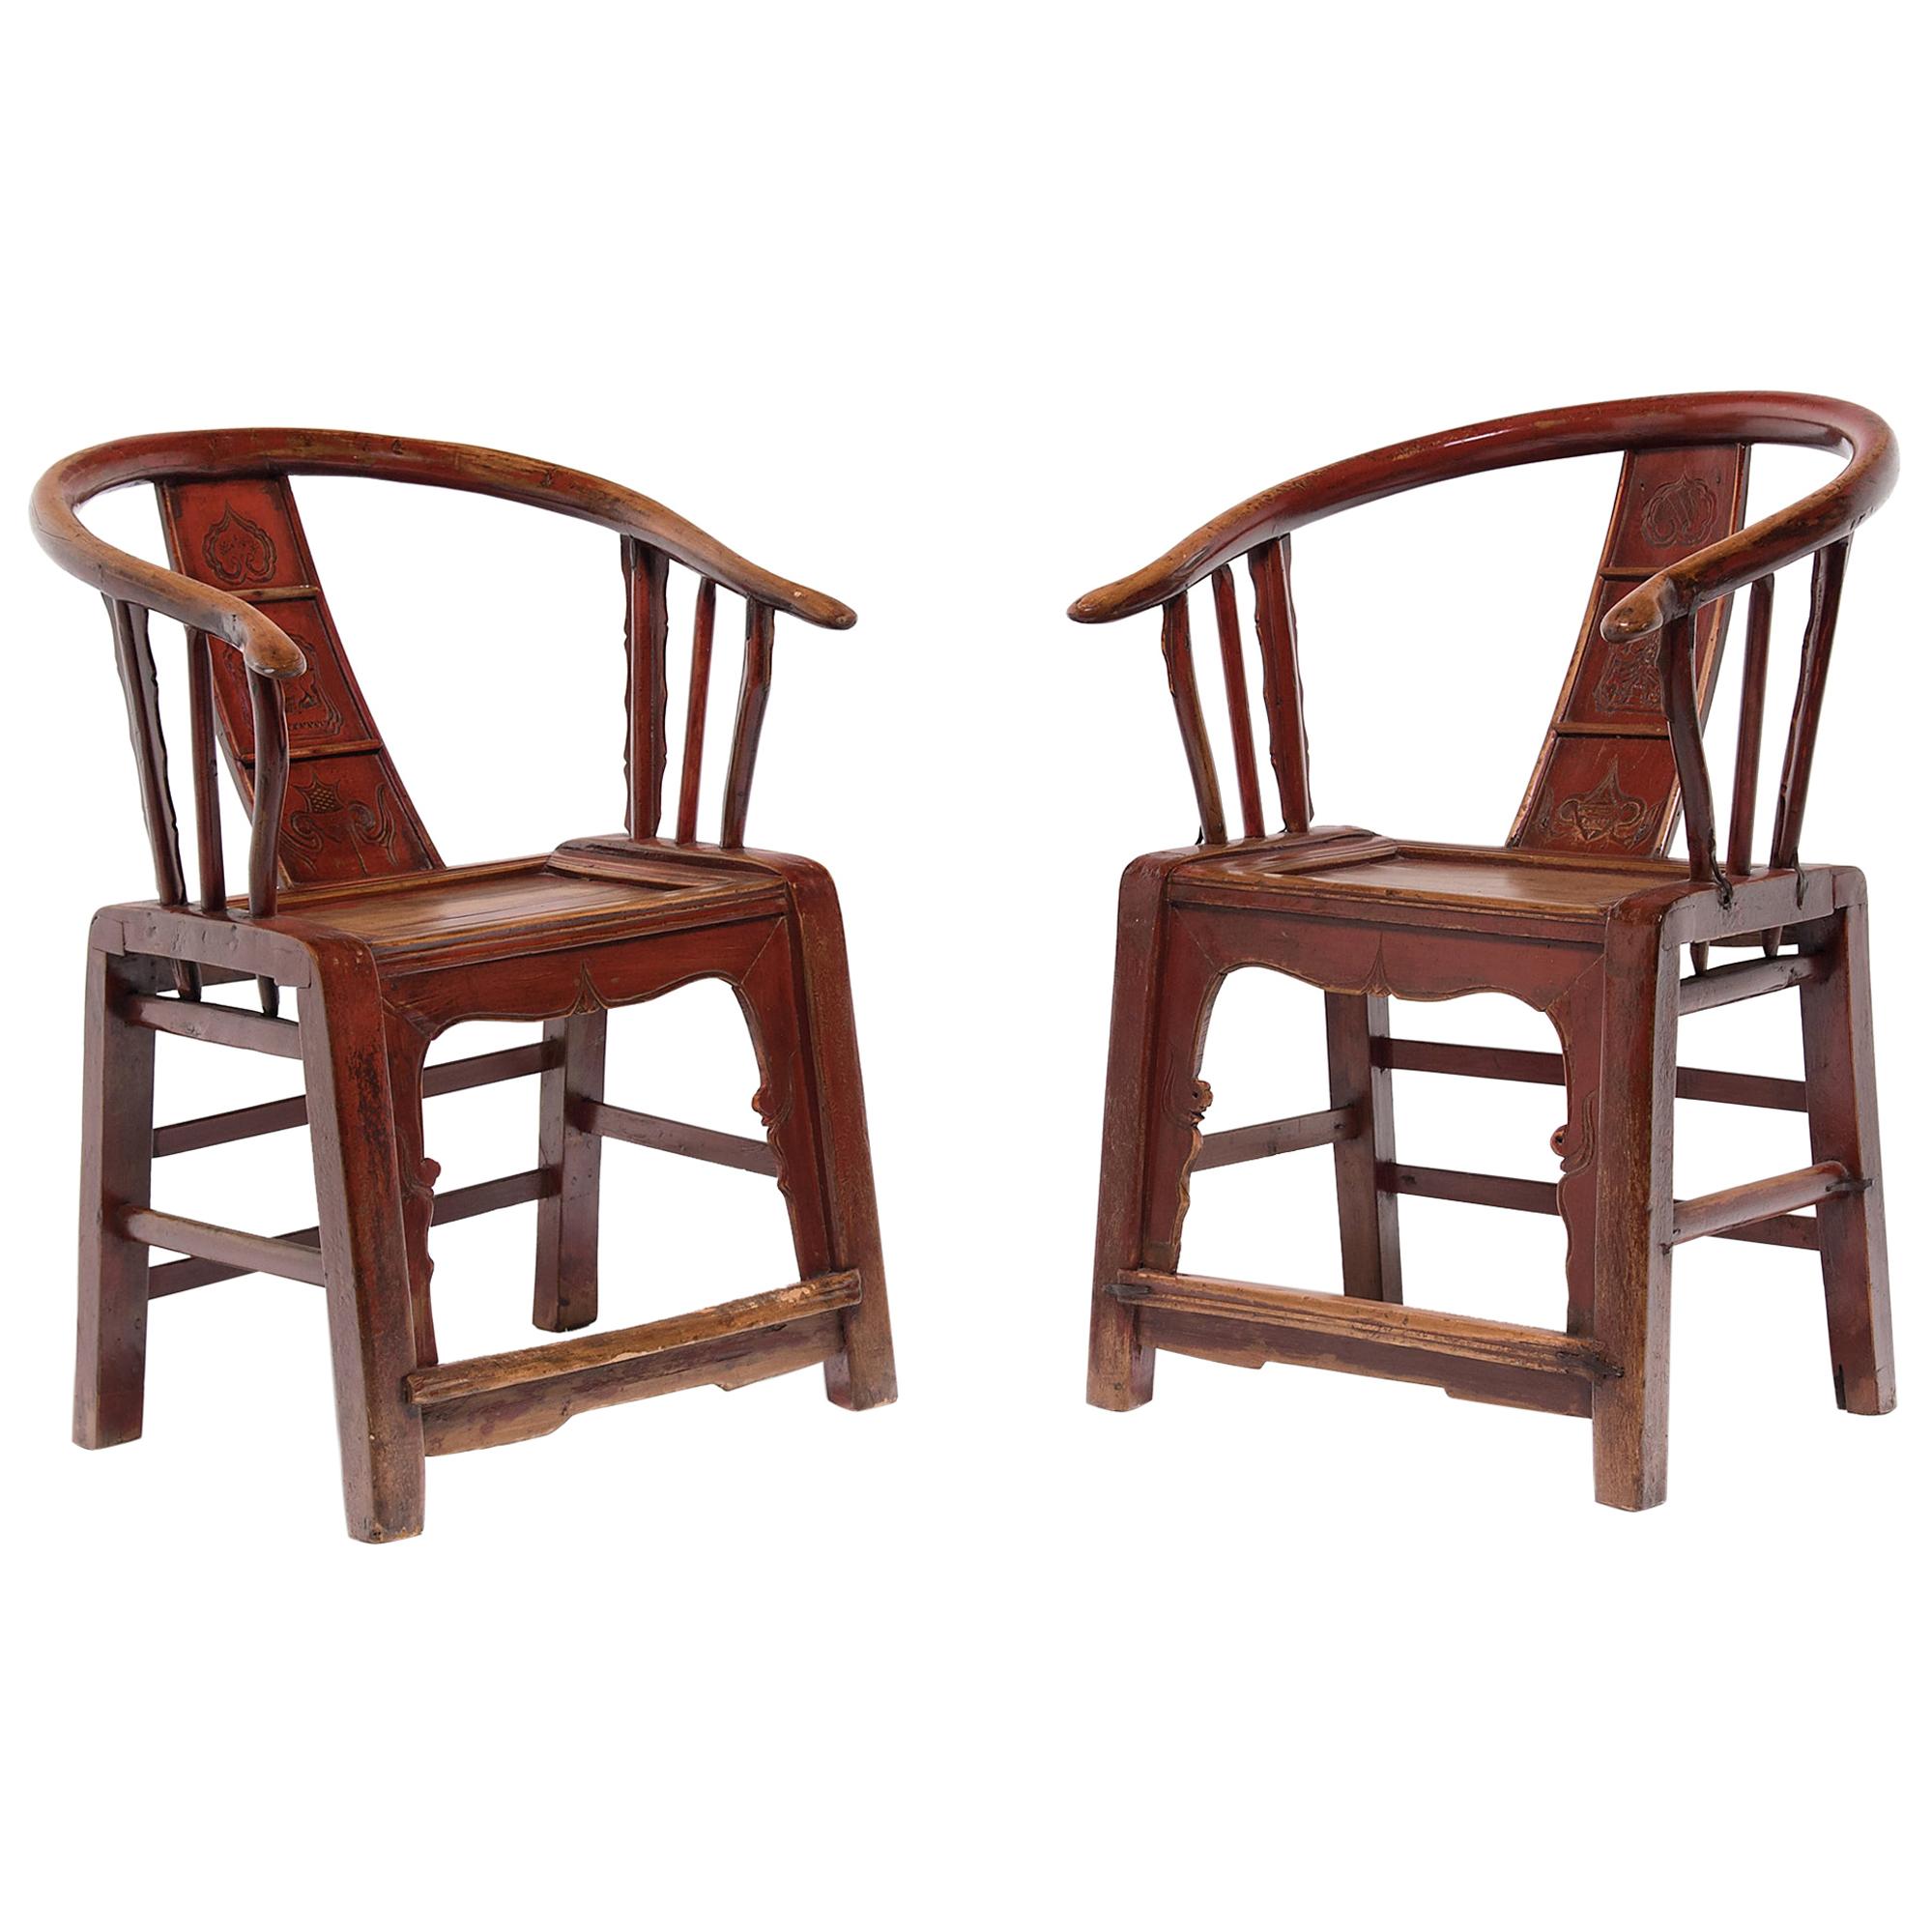 Pair of Chinese Red Lacquer Roundback Chairs, circa 1900